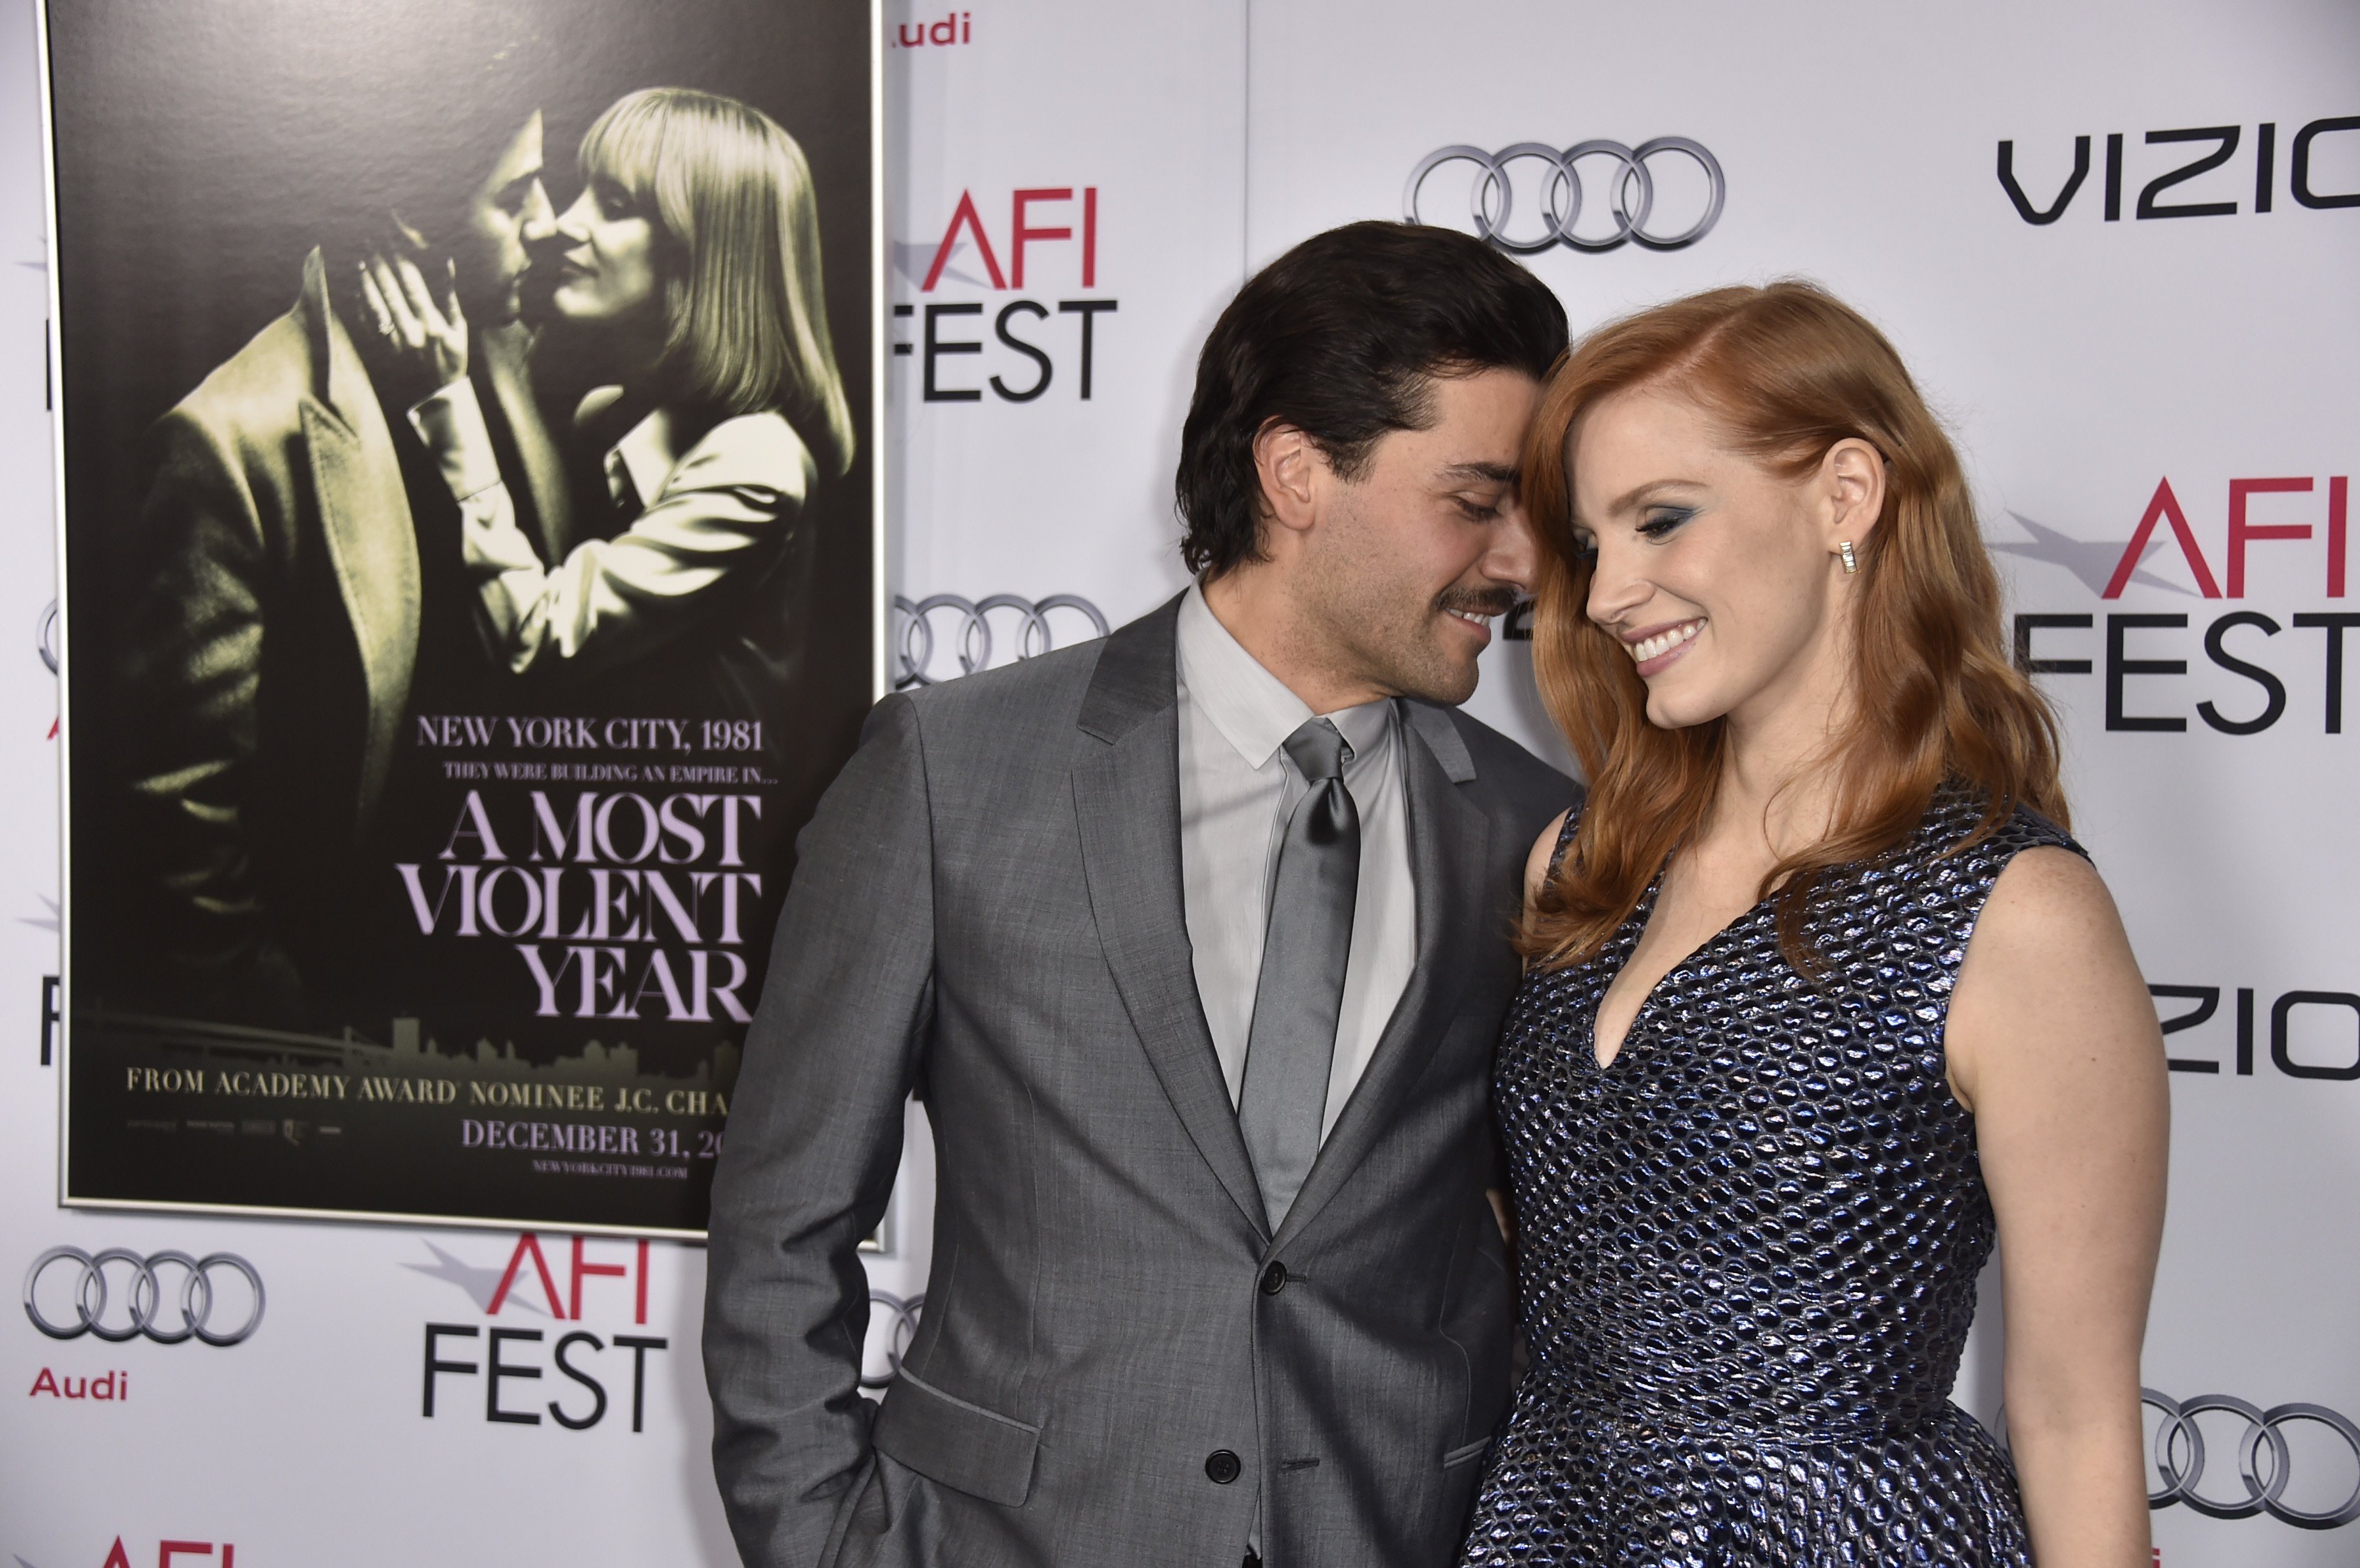 Oscar Isaac (L) and Jessica Chastain attend AFI FEST 2014 presented by Audi opening night gala premiere of A24's "A Most Violent Year" | Source: Getty Images